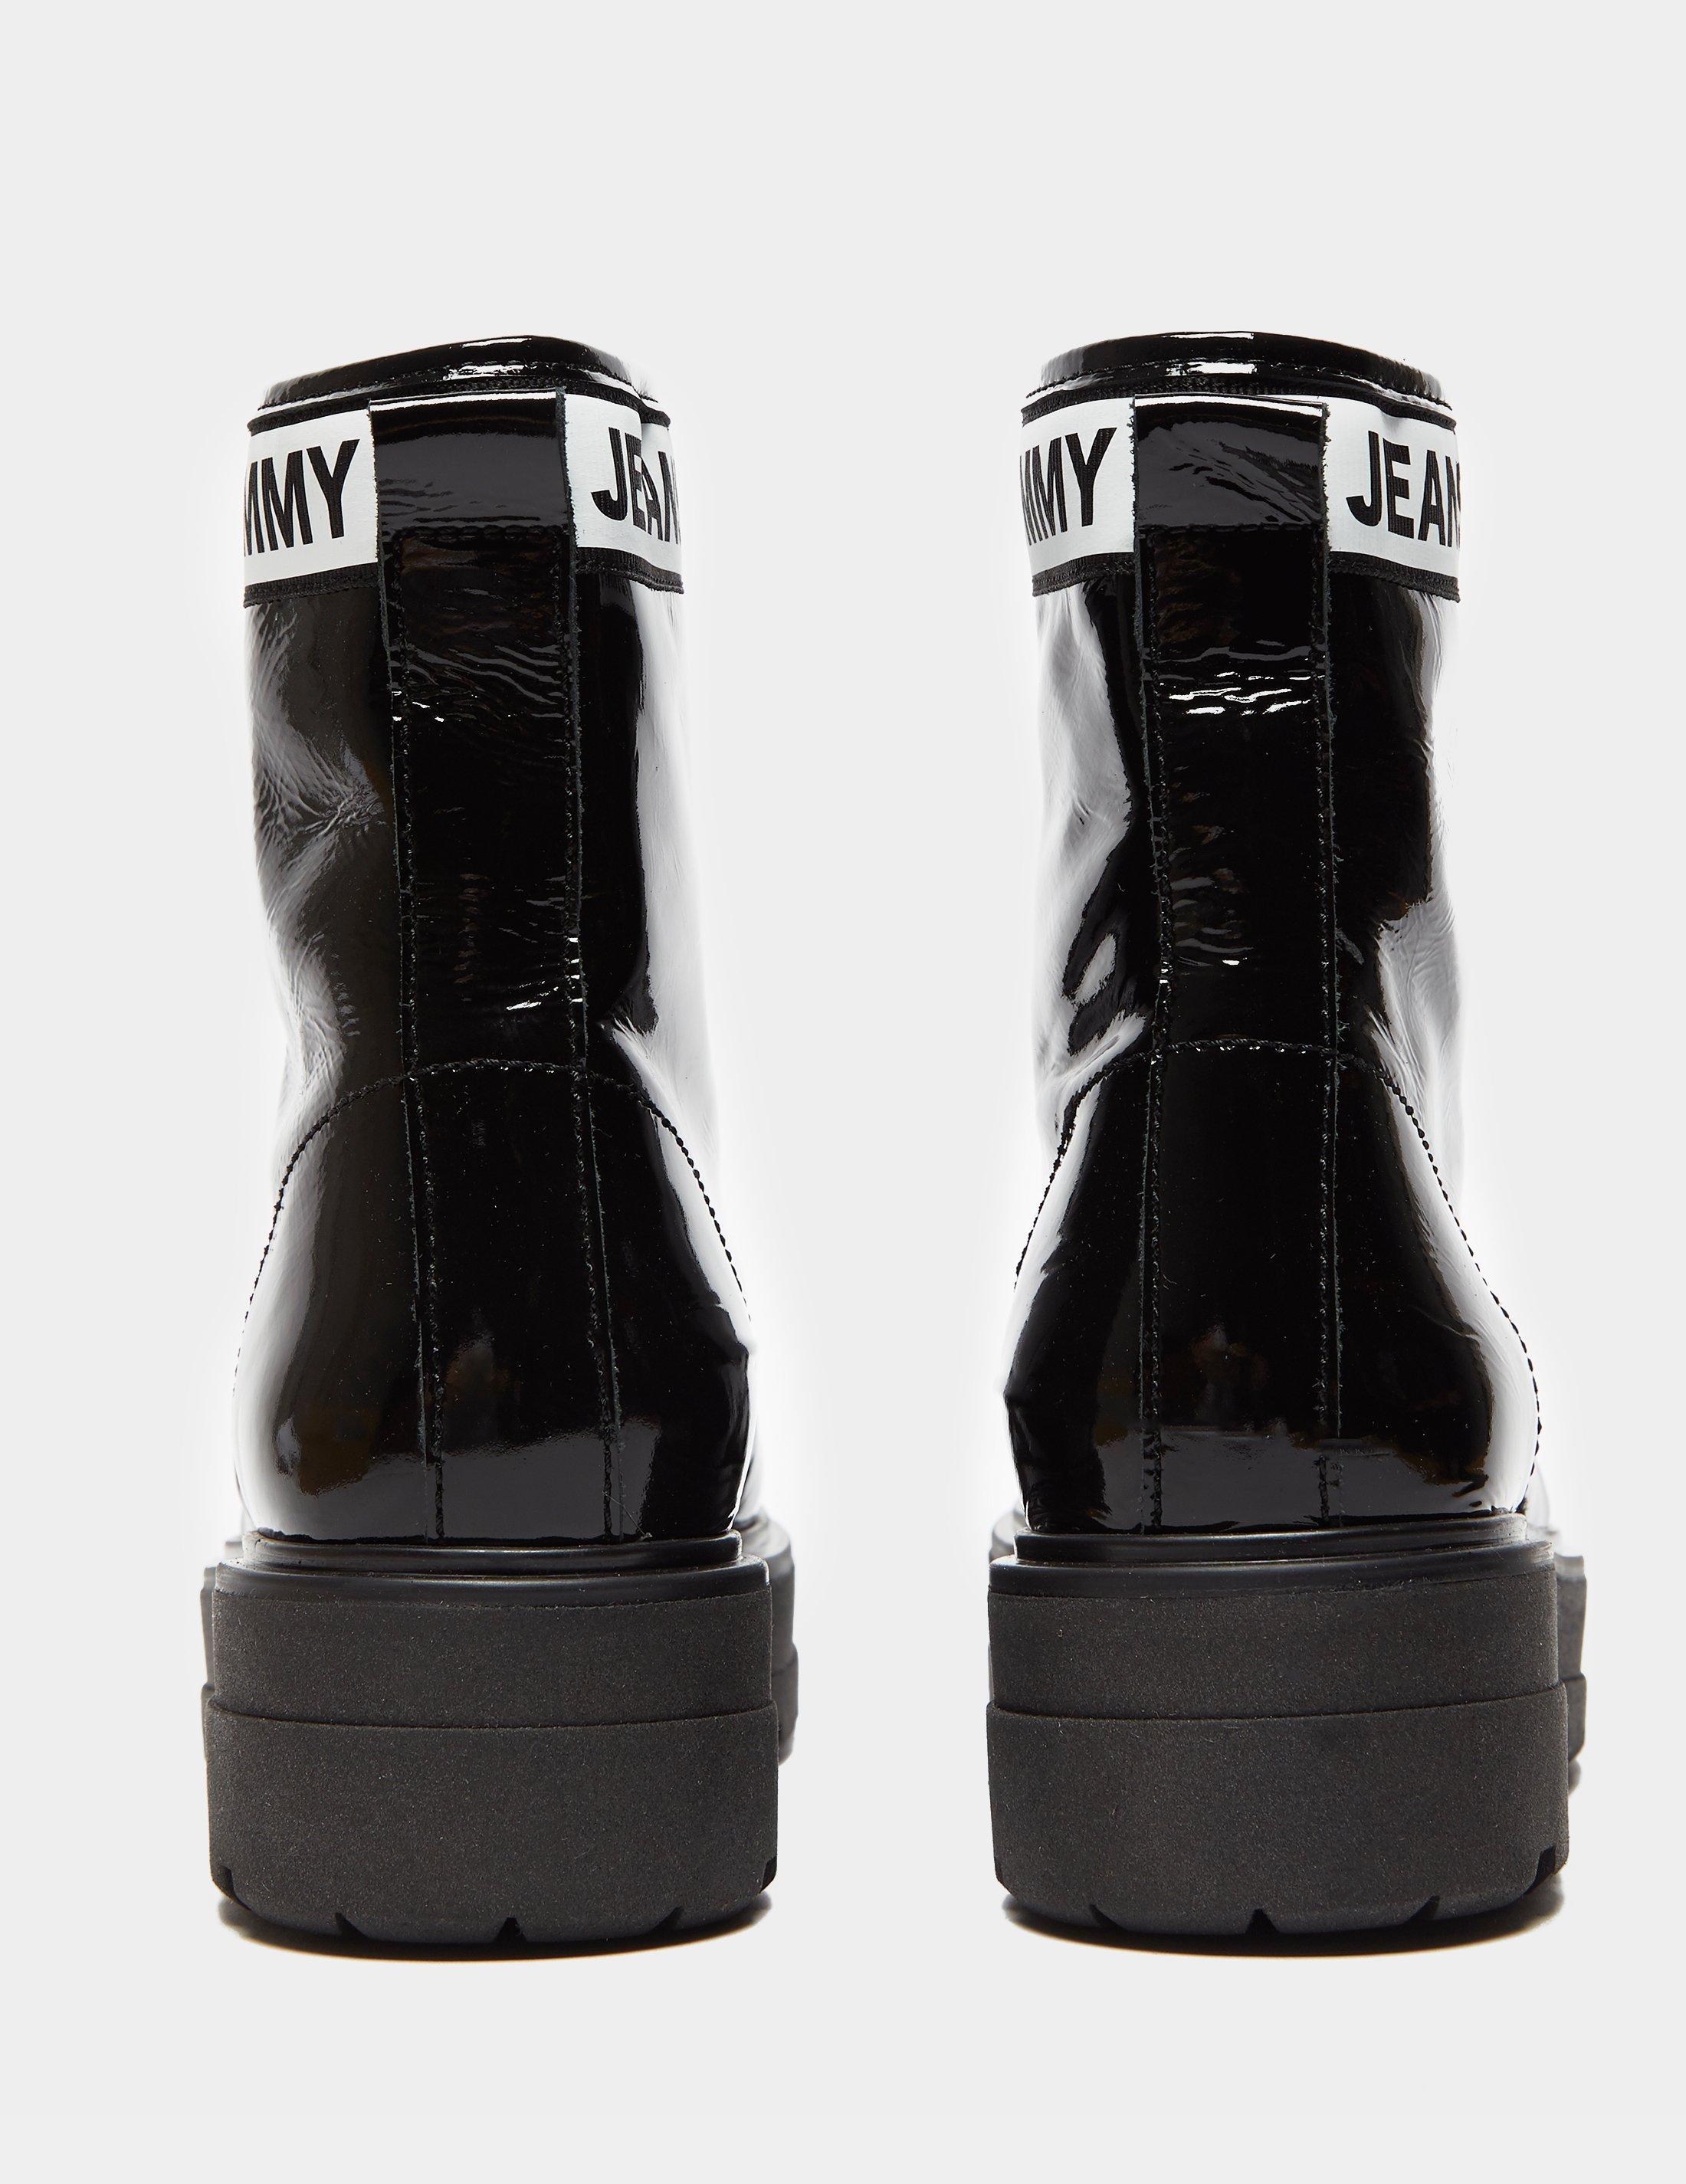 tommy hilfiger patent boots